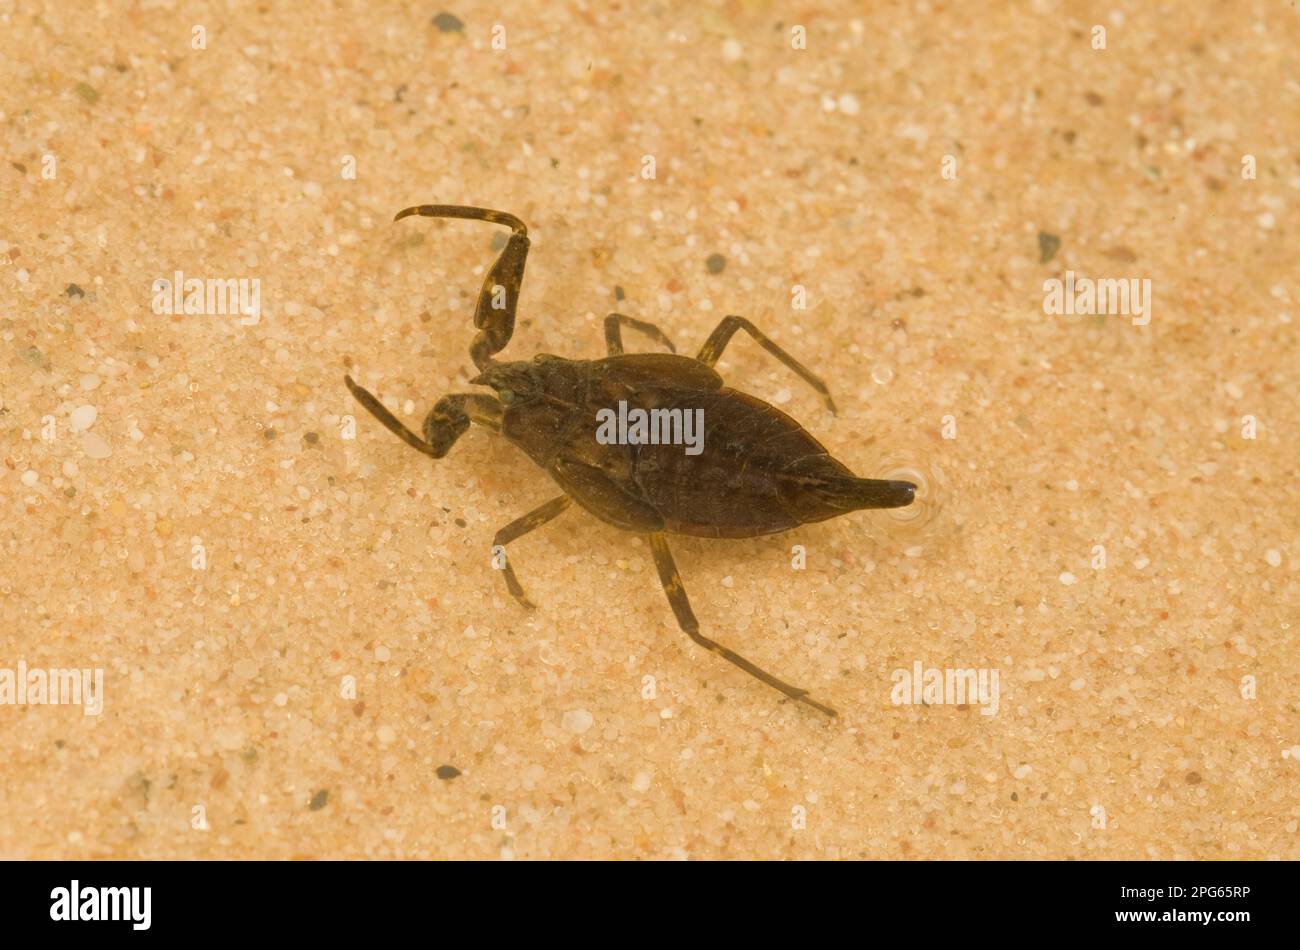 Water scorpion, water scorpions (Nepa cinerea), Water bug, Water bugs, Other animals, Insects, Animals, Bug, Bugs, Water scorpion immature, in Stock Photo